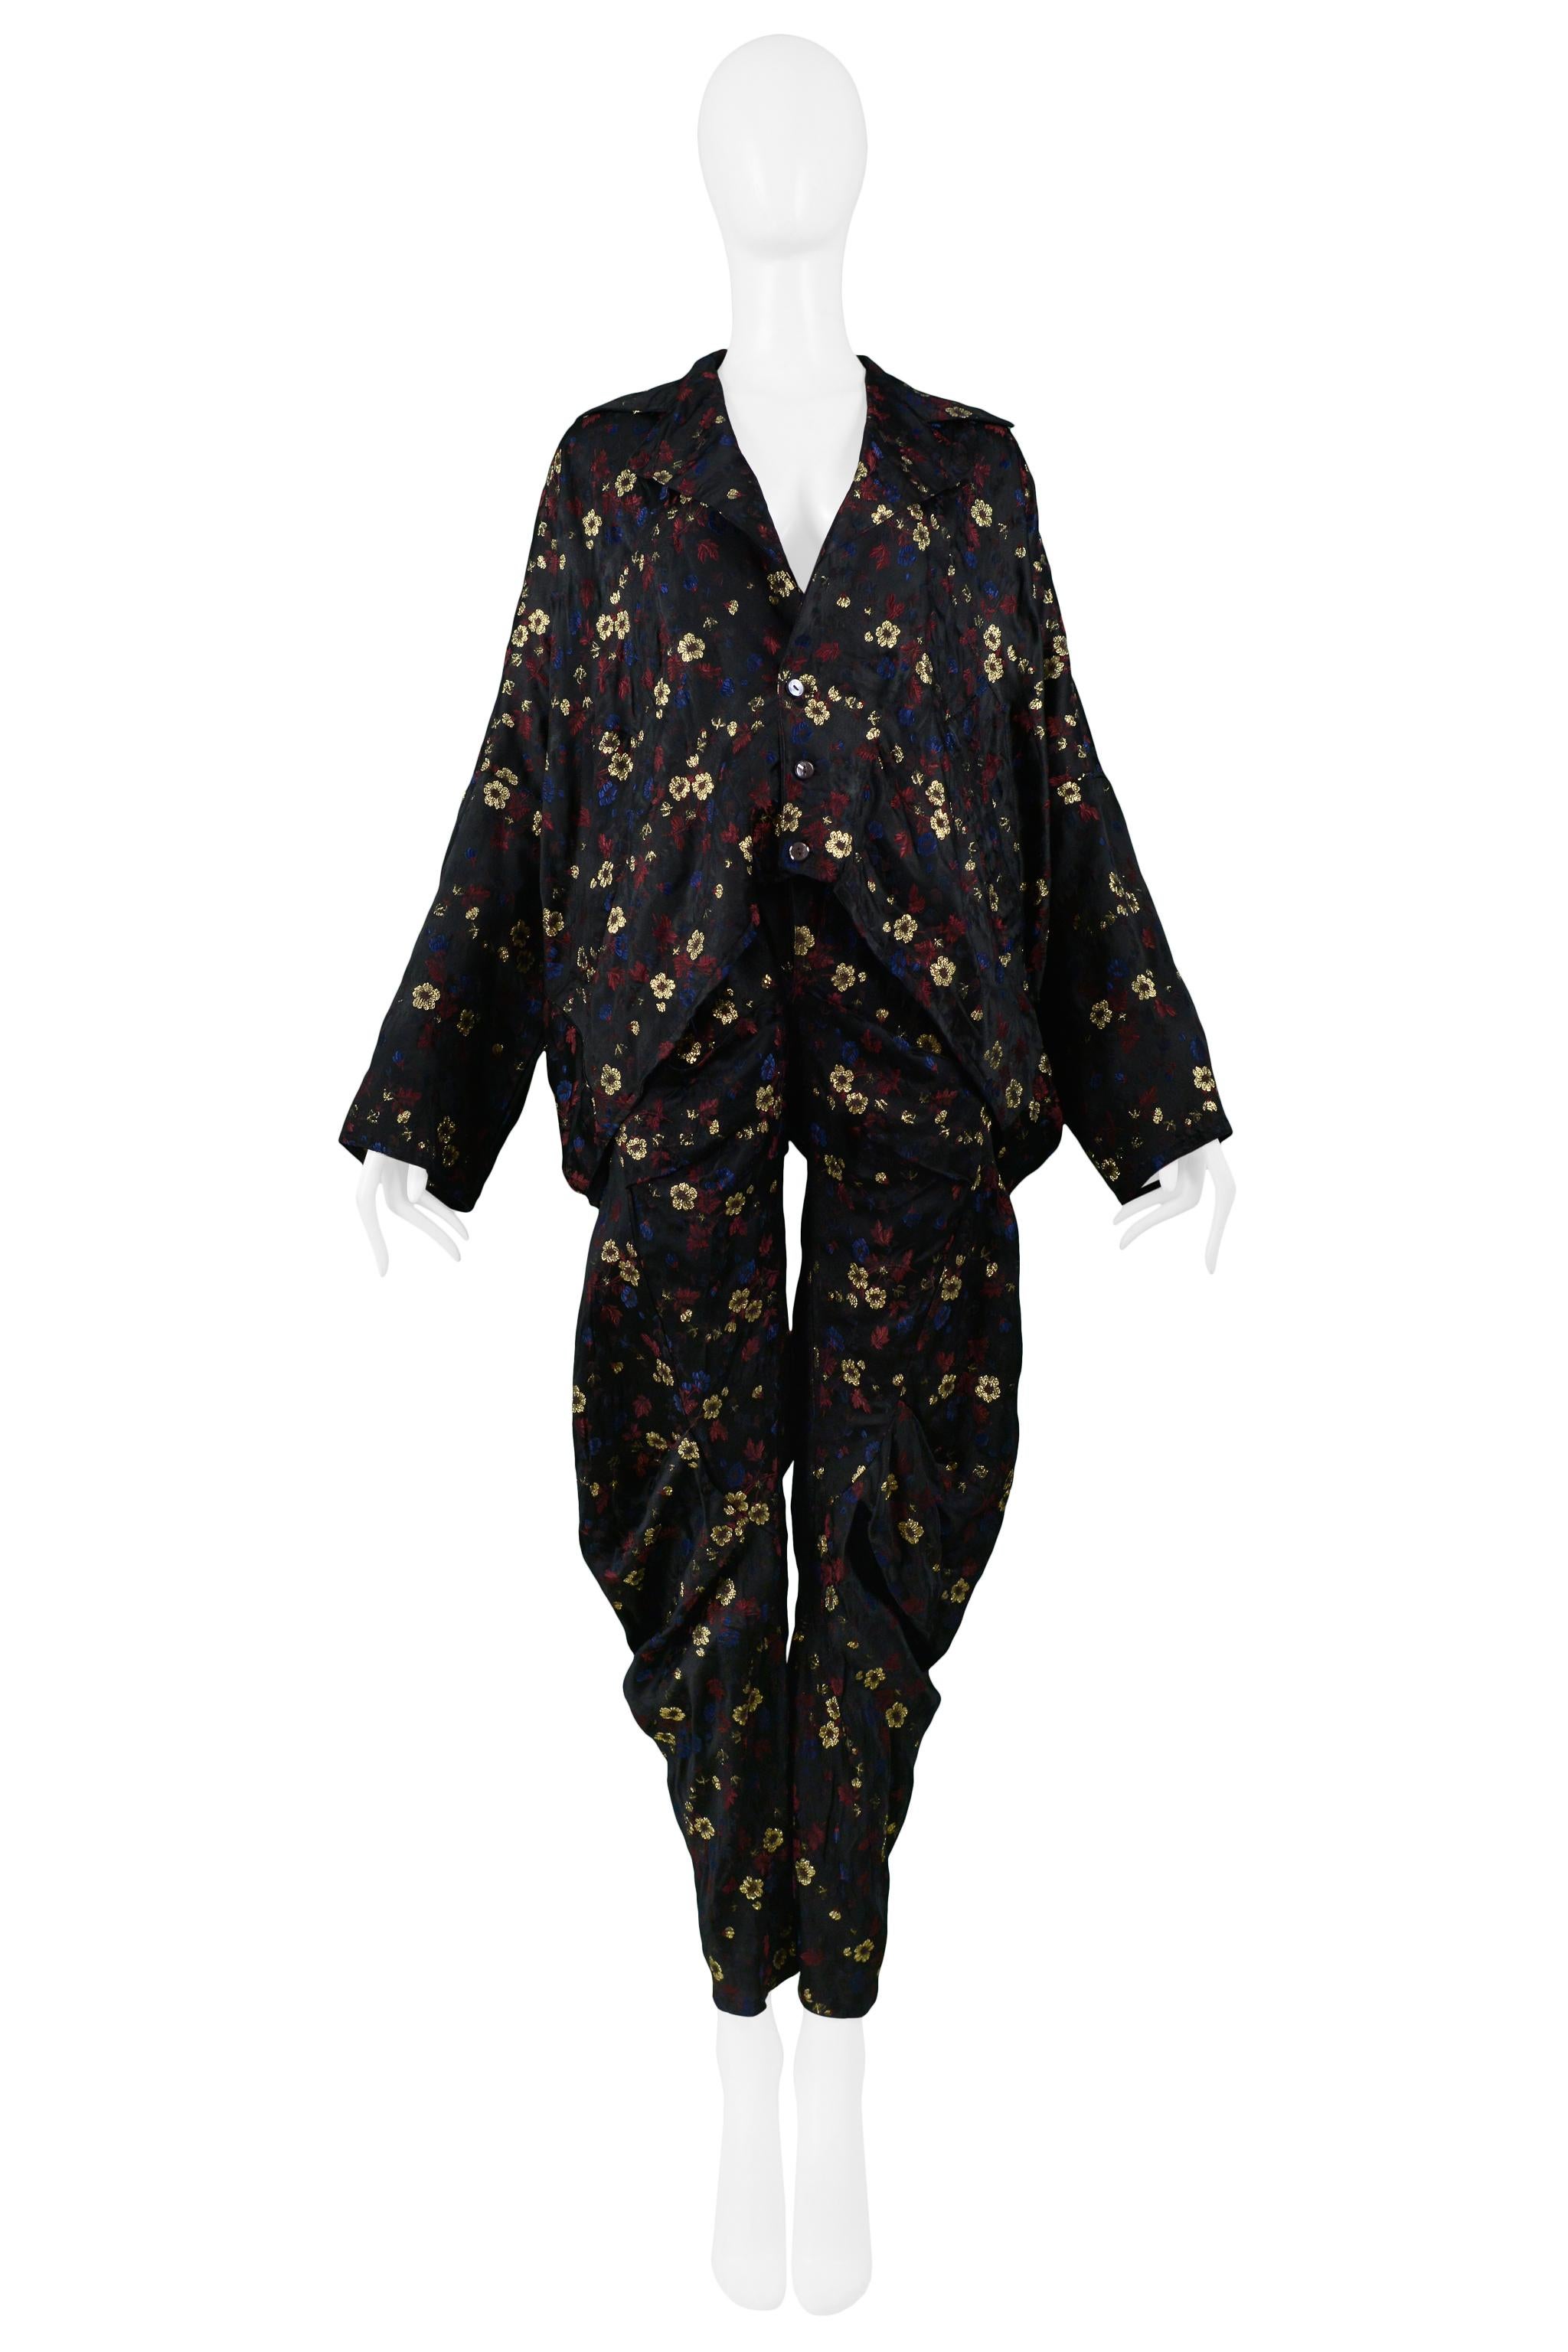 Resurrection Vintage is excited to offer a vintage Rachel Auburn jacket and pants ensemble featuring a metallic floral jacquard textile, a button-front jacket with an overlapping back with an exposed cutout. The pants feature all-over draping, side